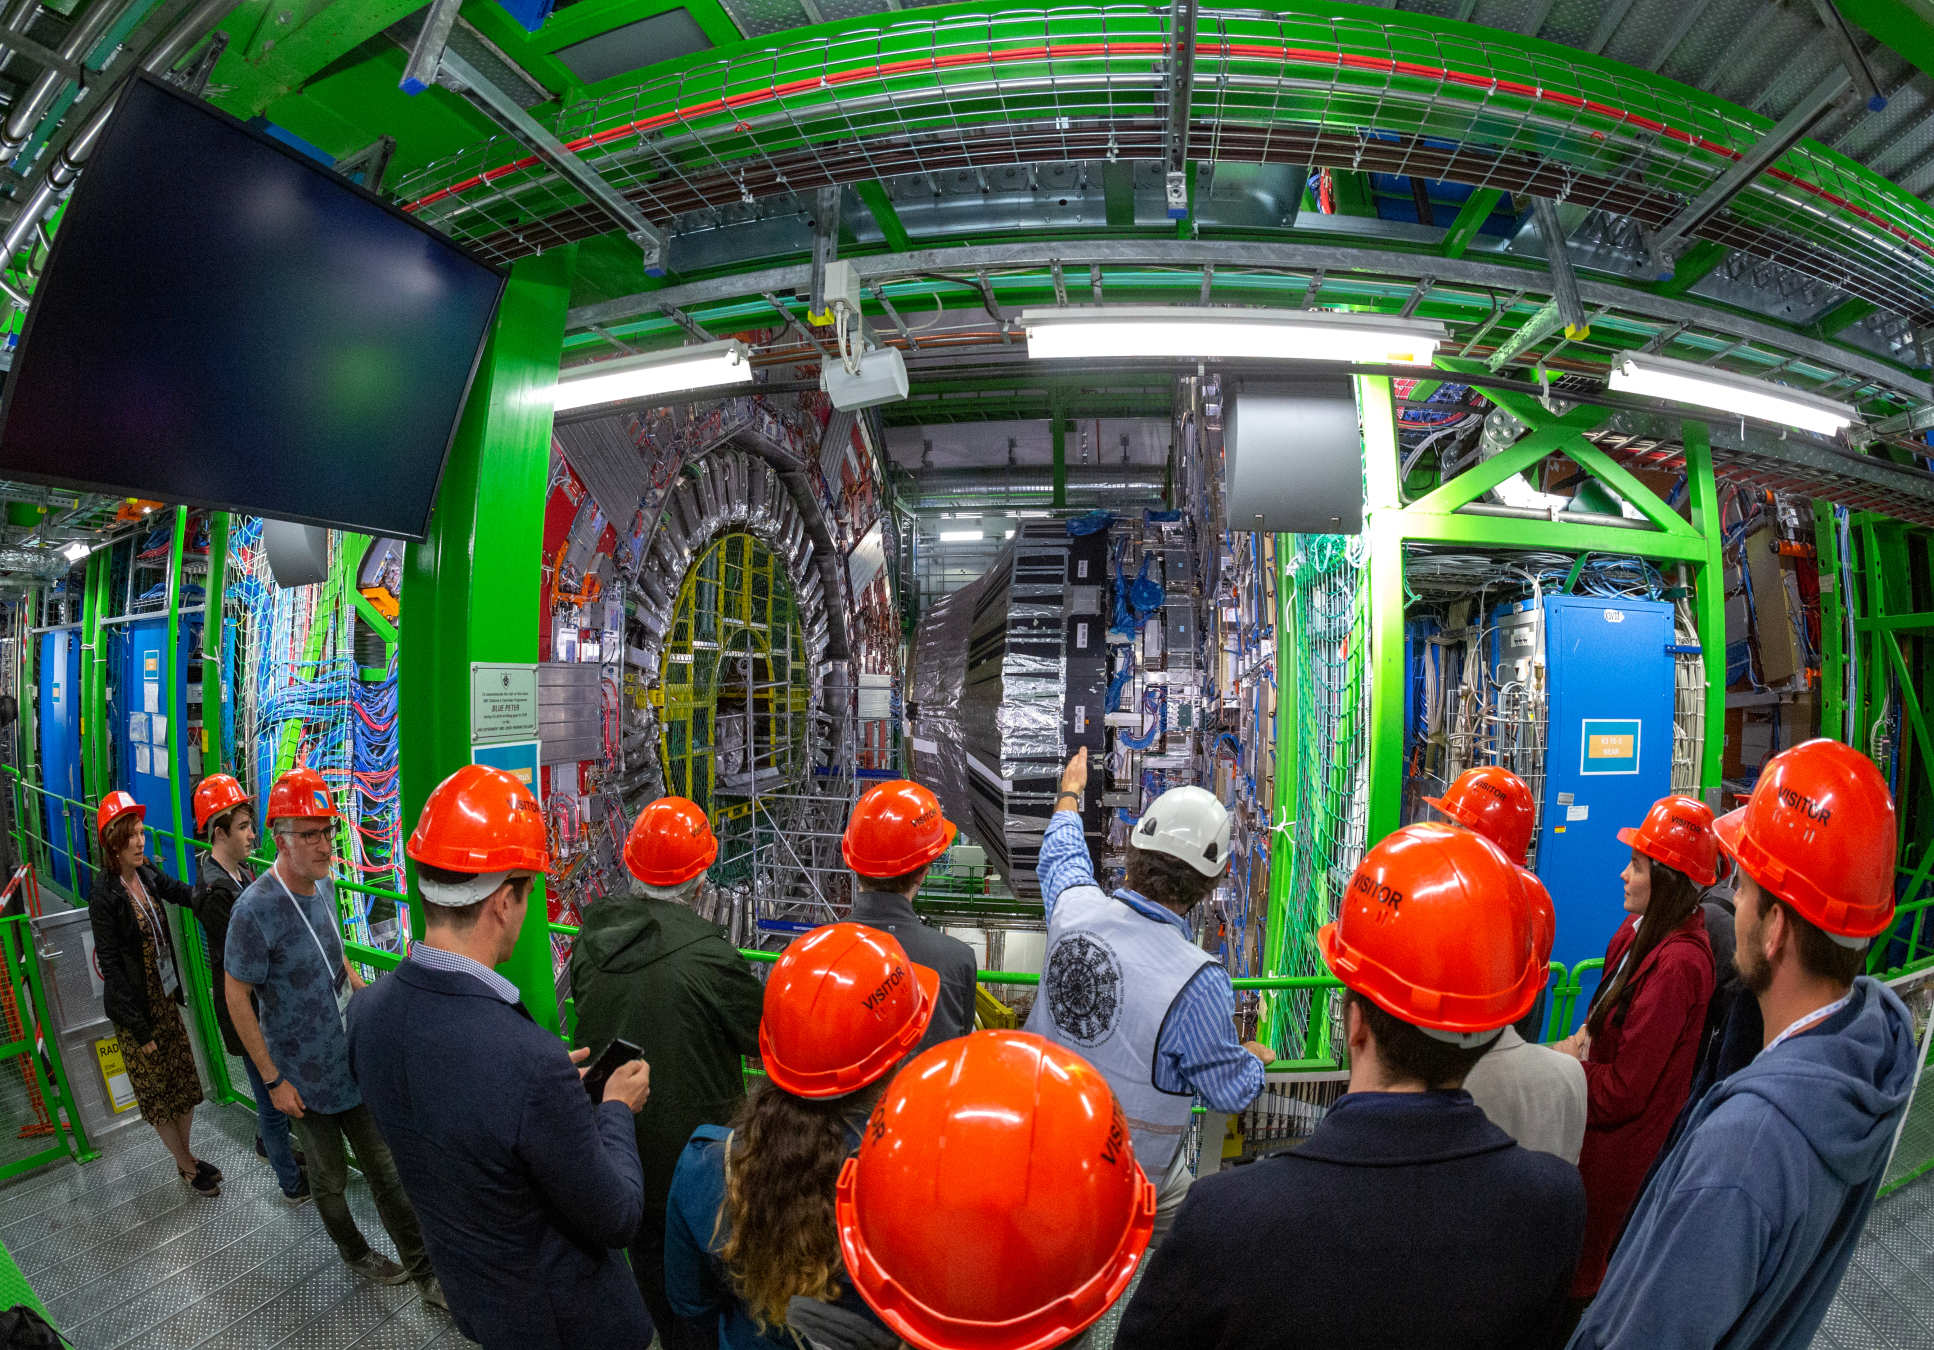 Alumni looking at the Large Hadron Collider